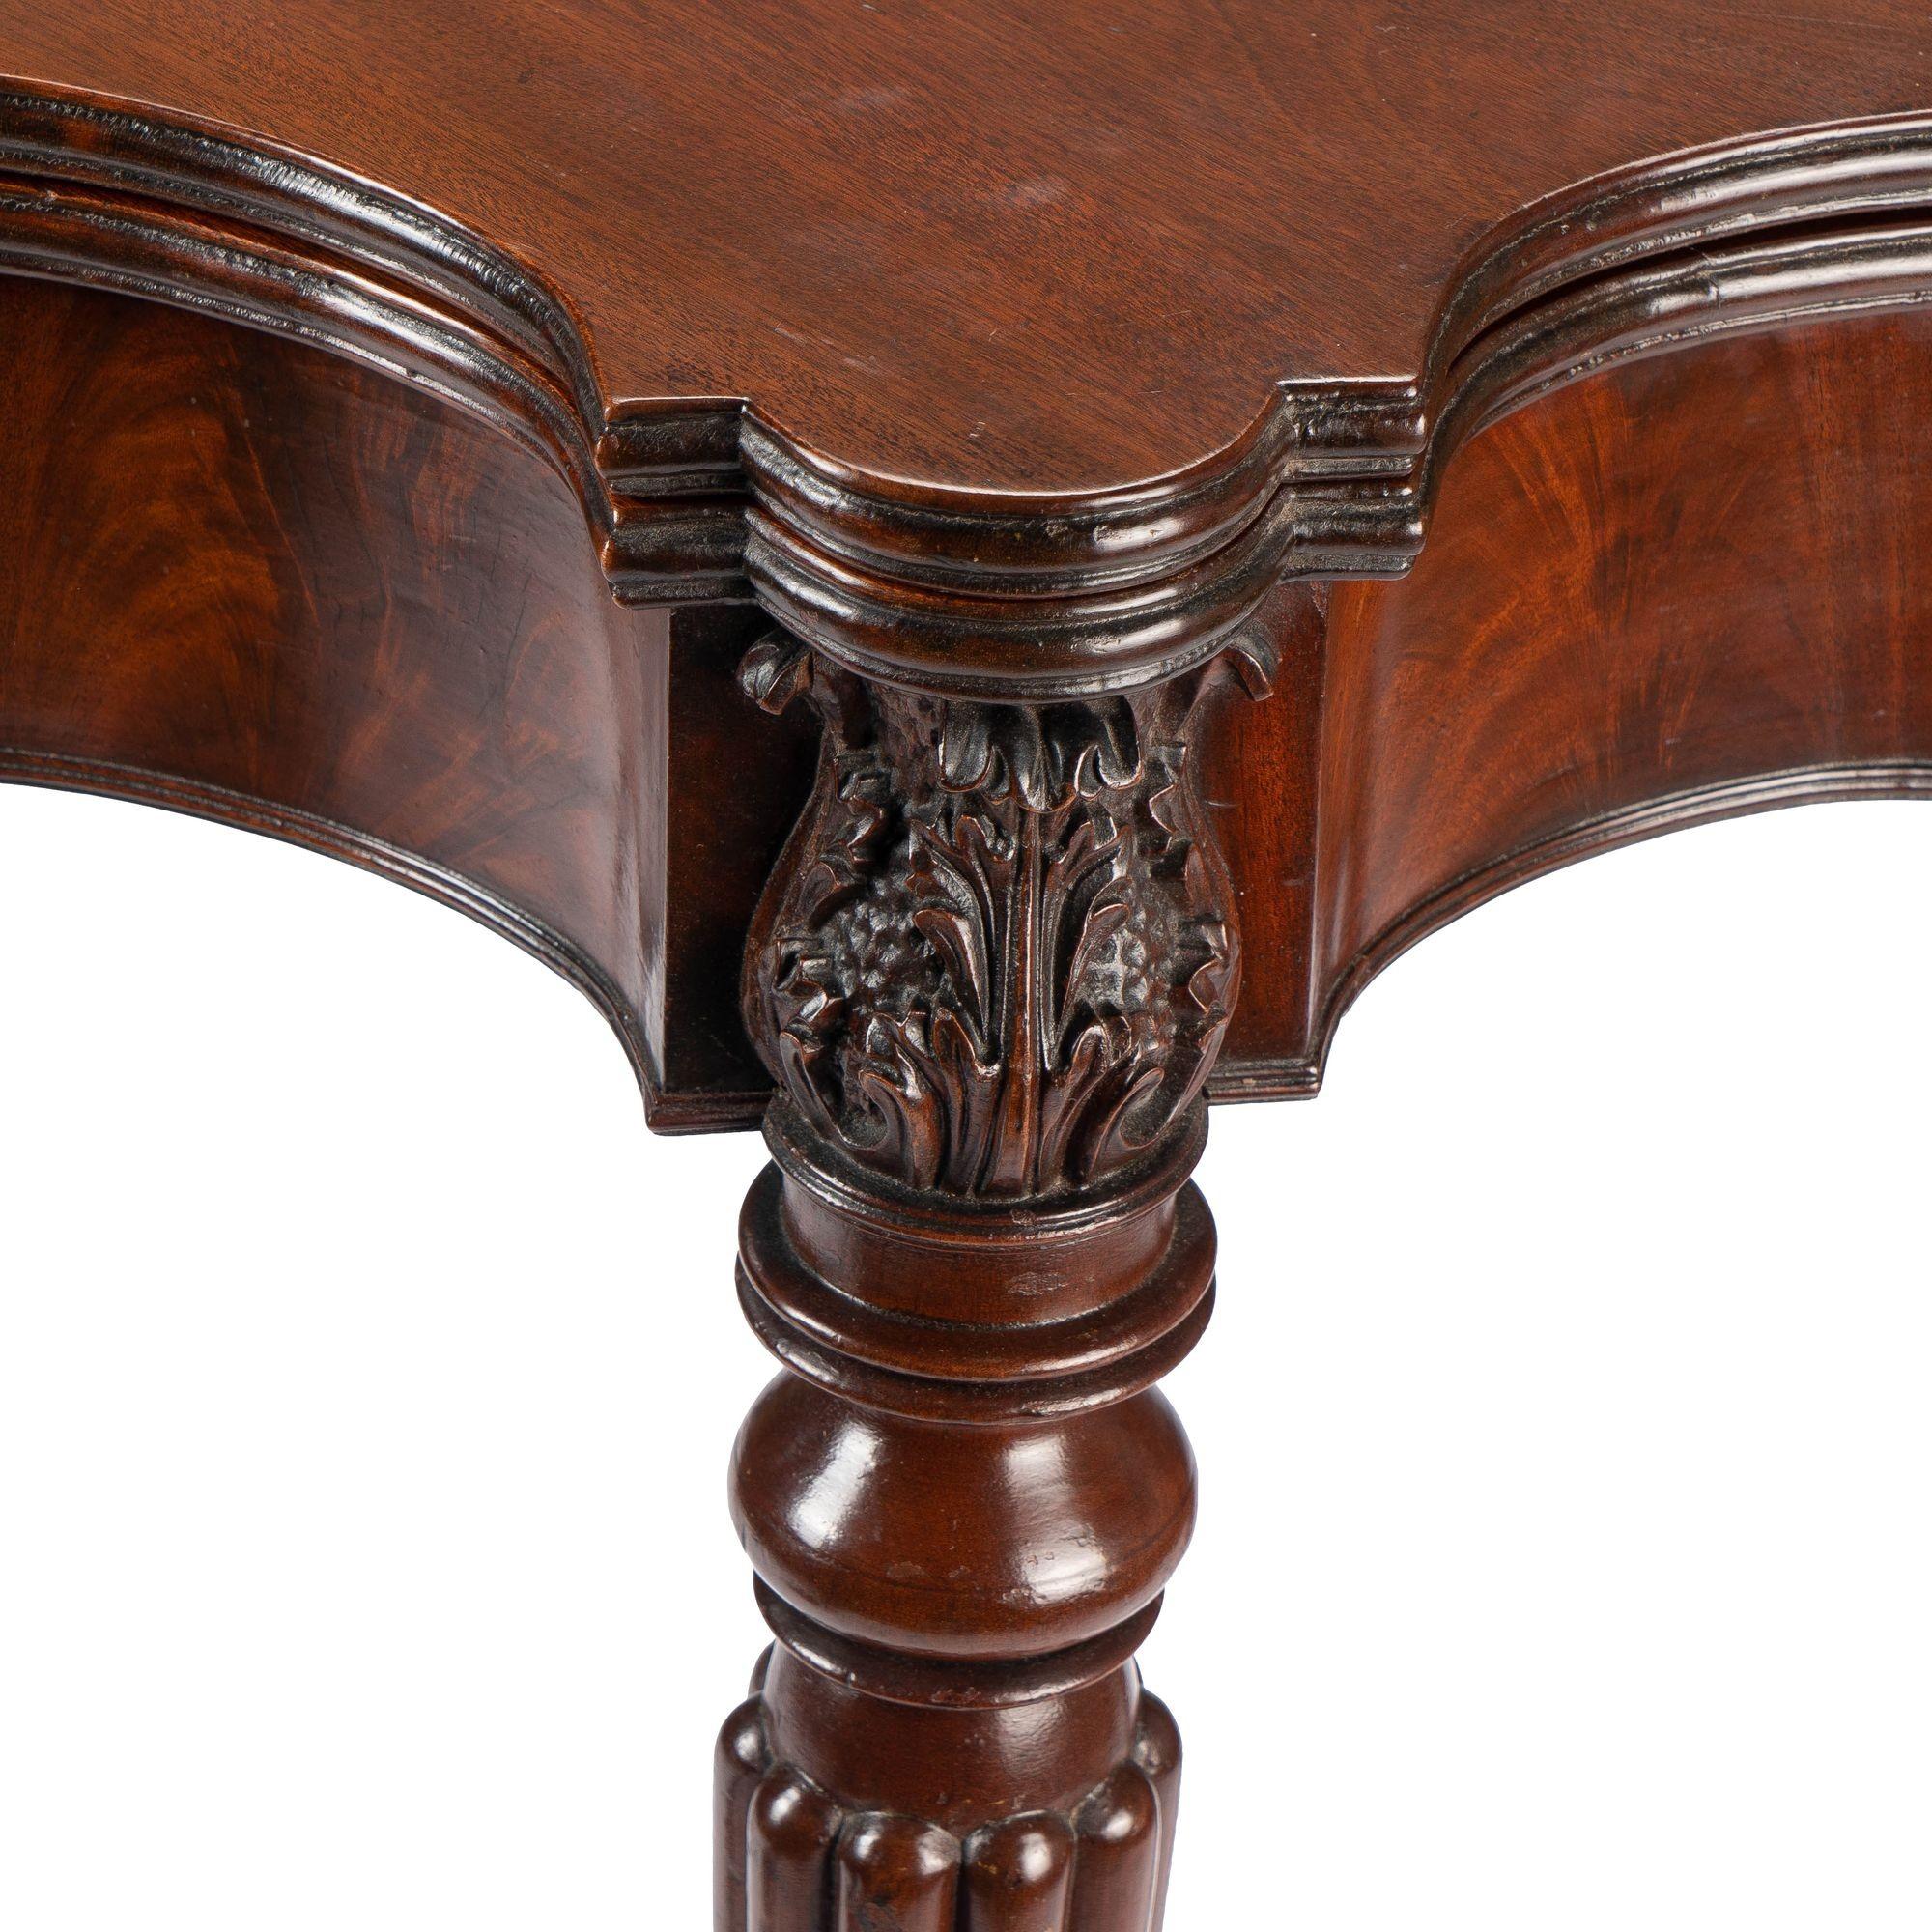 Samuel Field Macintire Attributed Mahogany Flip Top Game Table, c. 1810-15 For Sale 12